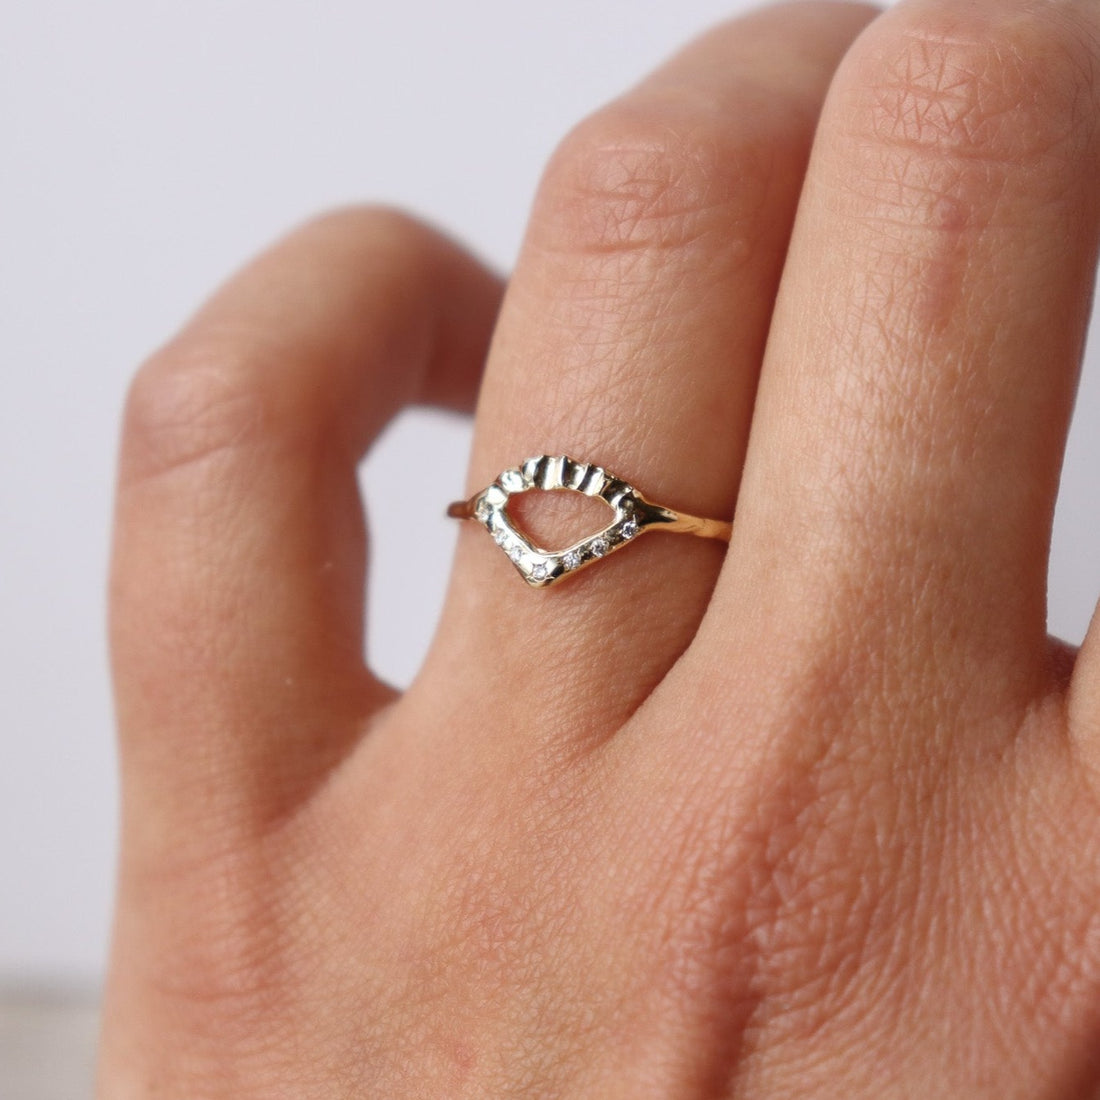 Elegant gold ring with V-shaped diamond detail and arched fin texture, worn to show scale.